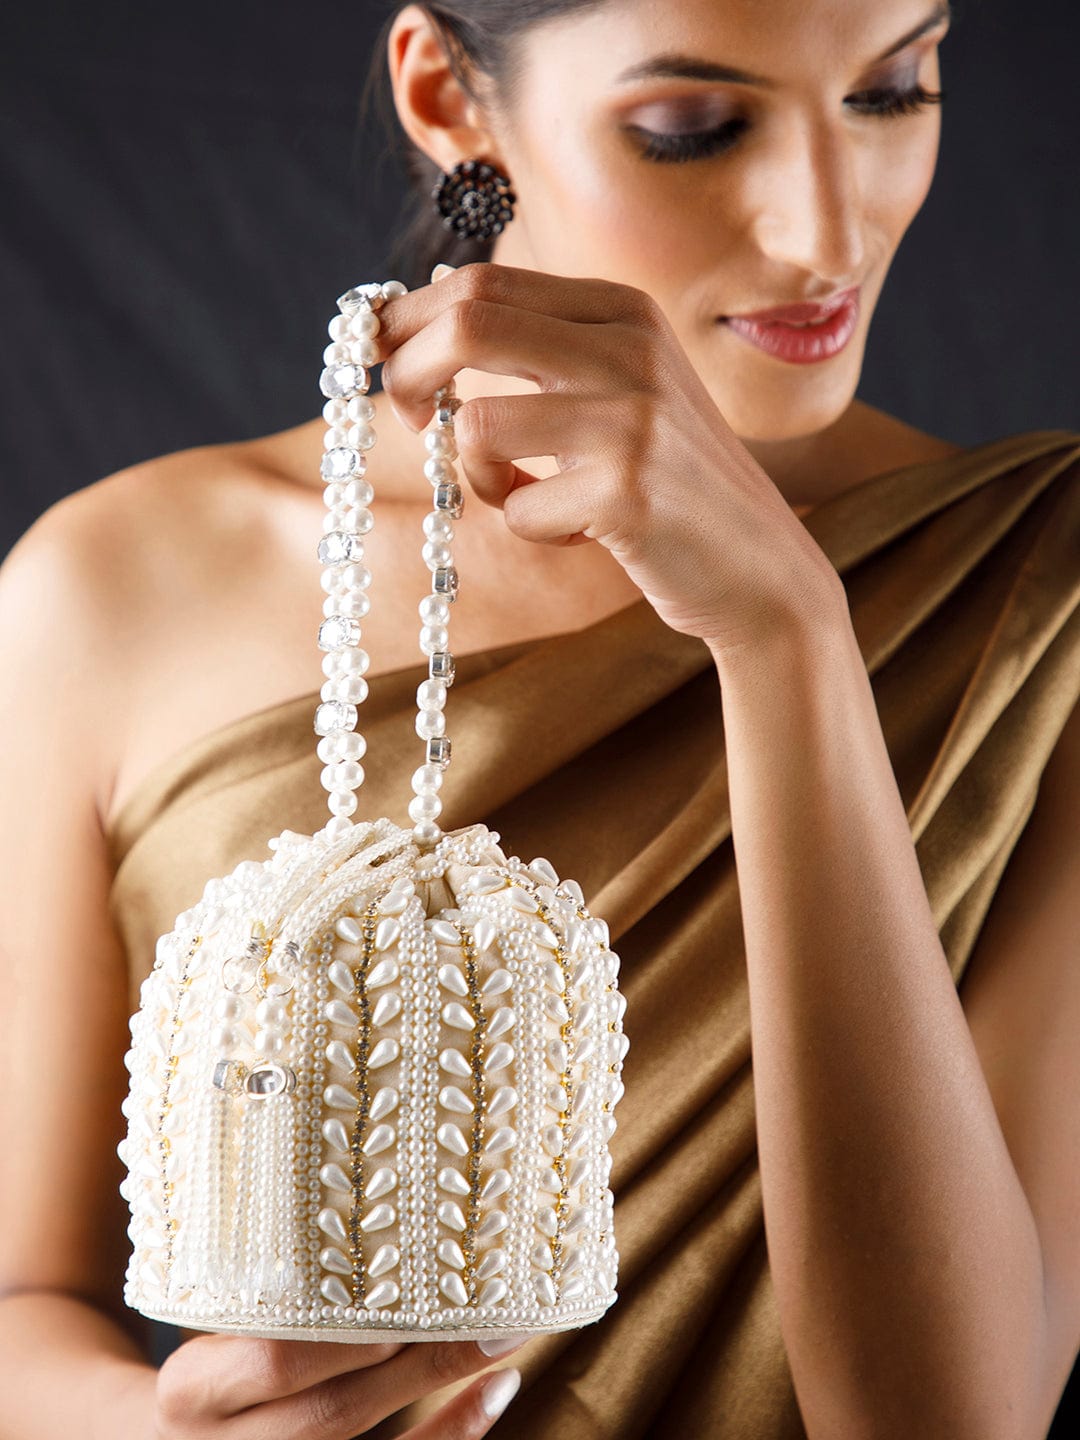 Rubans Off White Coloured Potli Bag With Golden Embroided Design And Pearls. Handbag & Wallet Accessories